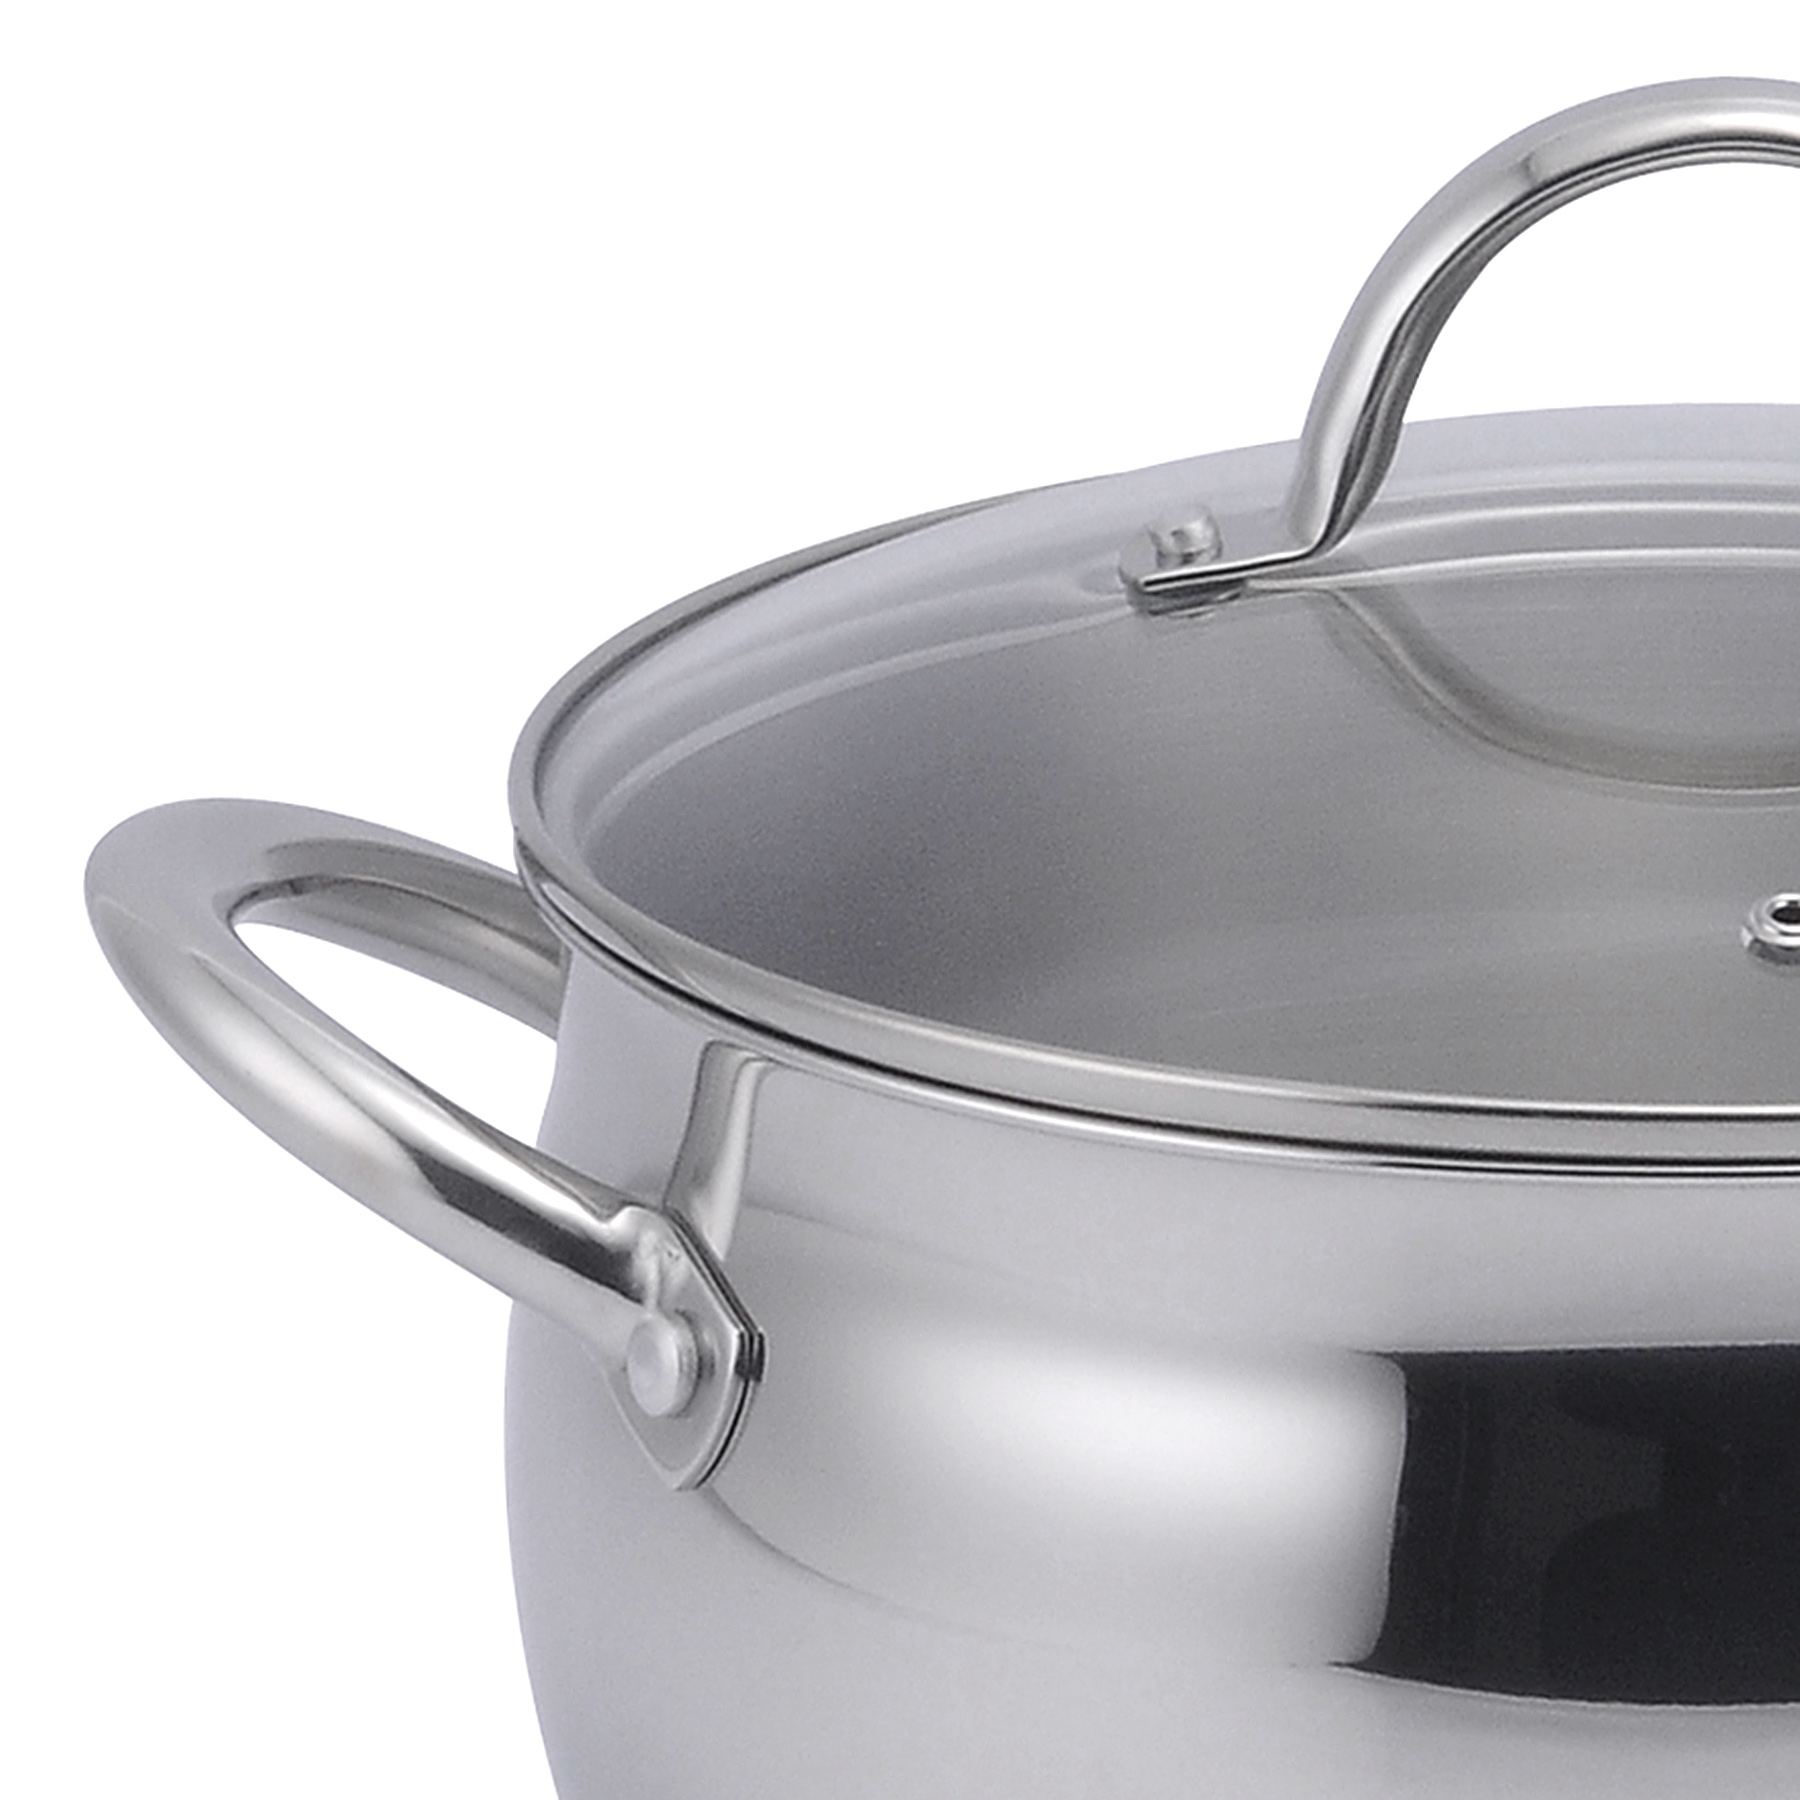 https://www.usakitchendining.com/wp-content/uploads/2023/03/bistro-6-quarts-stainless-steel-dutch-oven-with-lid-1.jpg